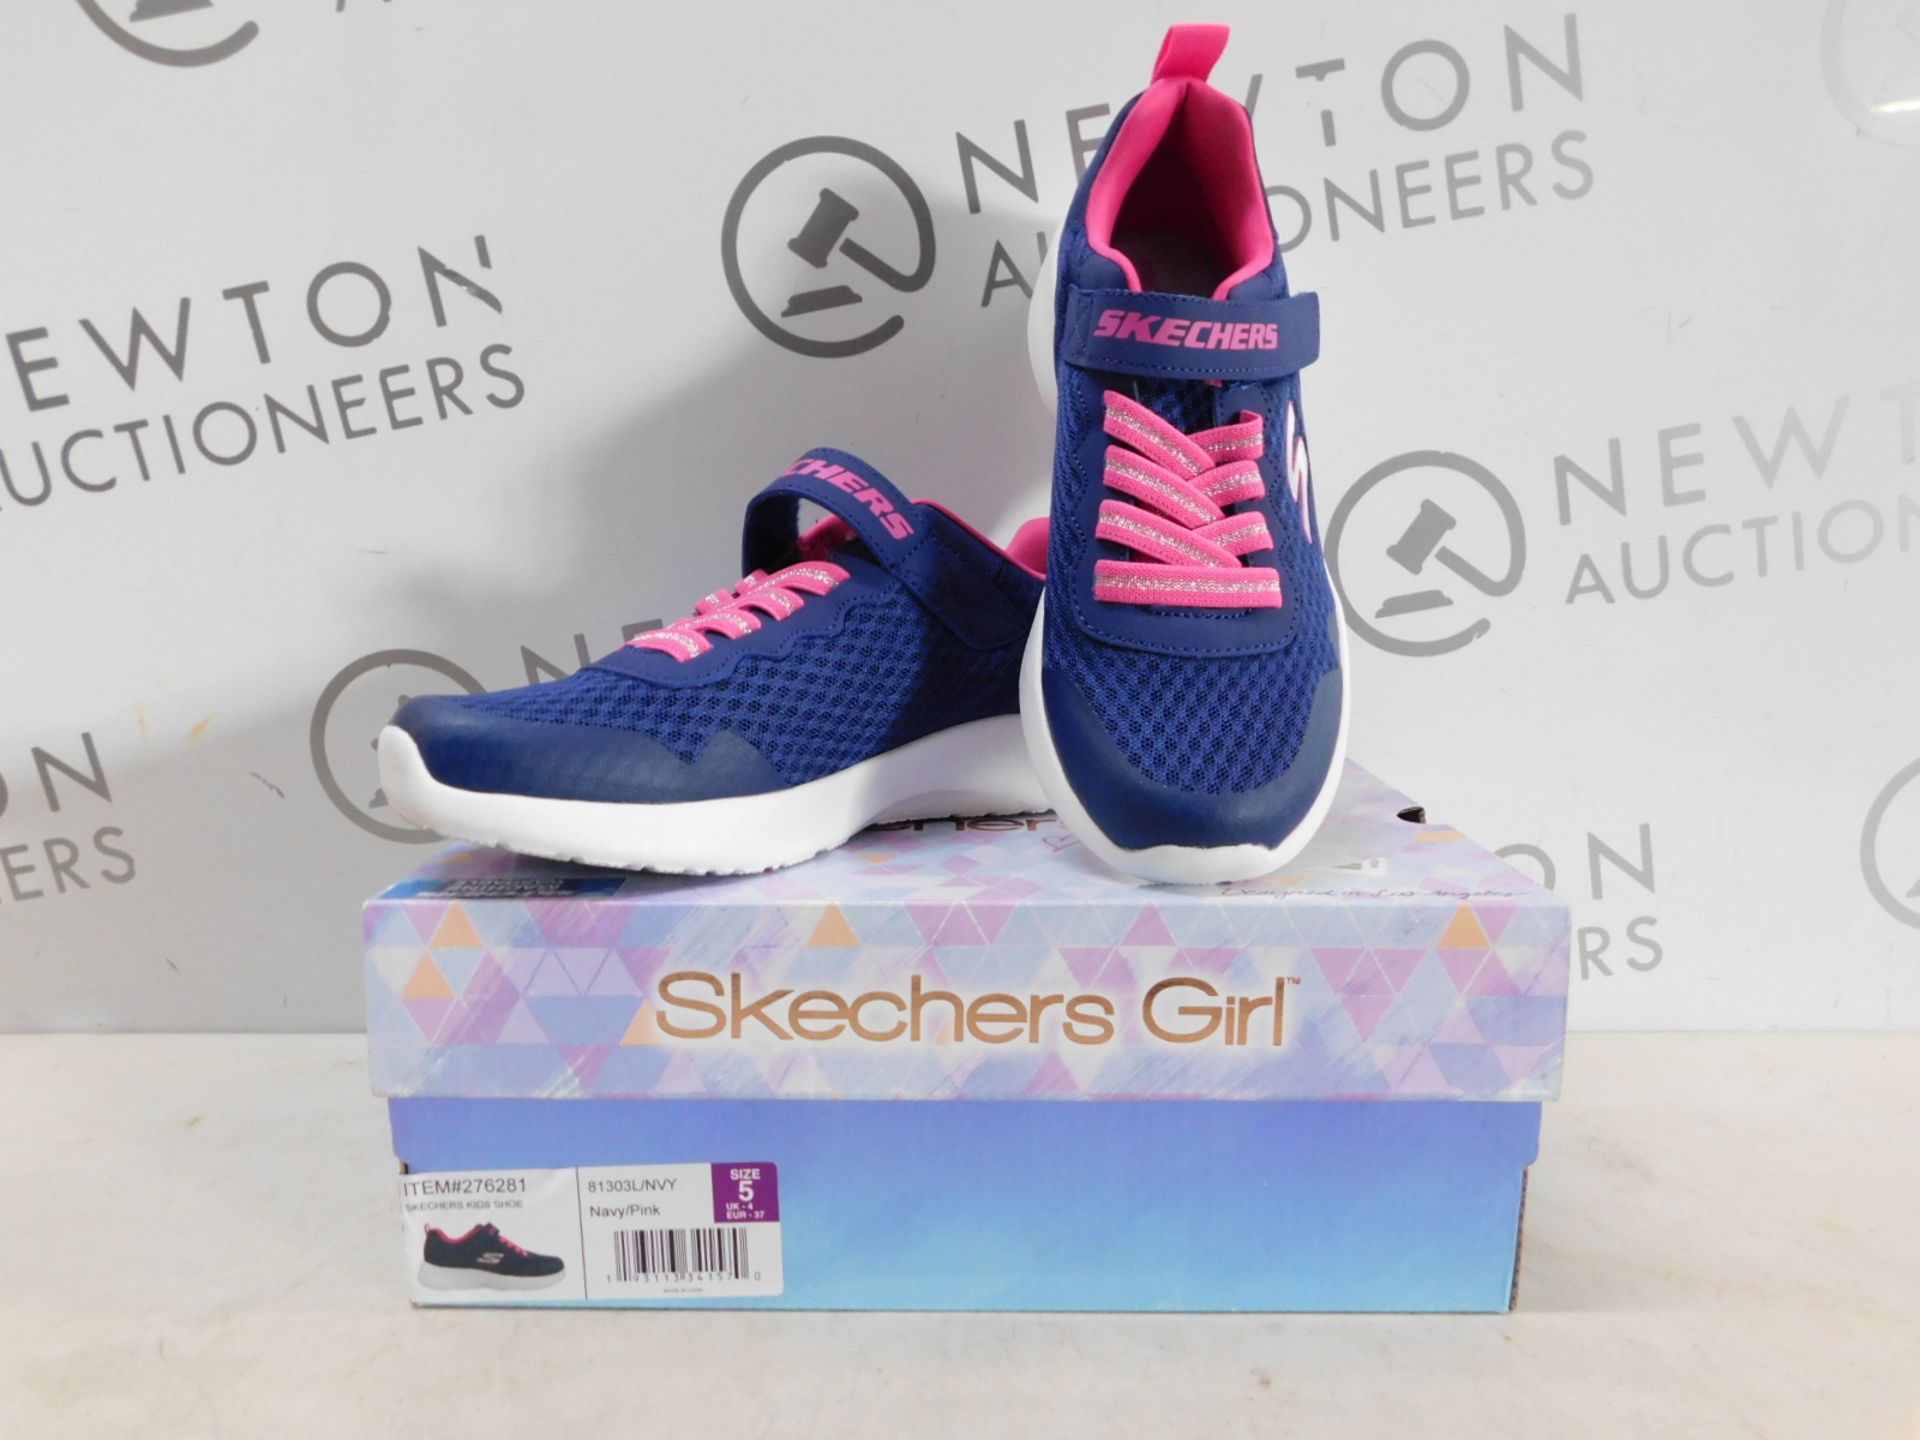 1 BOXED PAIR OF SKECHERS KIDS NAVY/ PINK TRAINERS SIZE 4 RRP £39.99